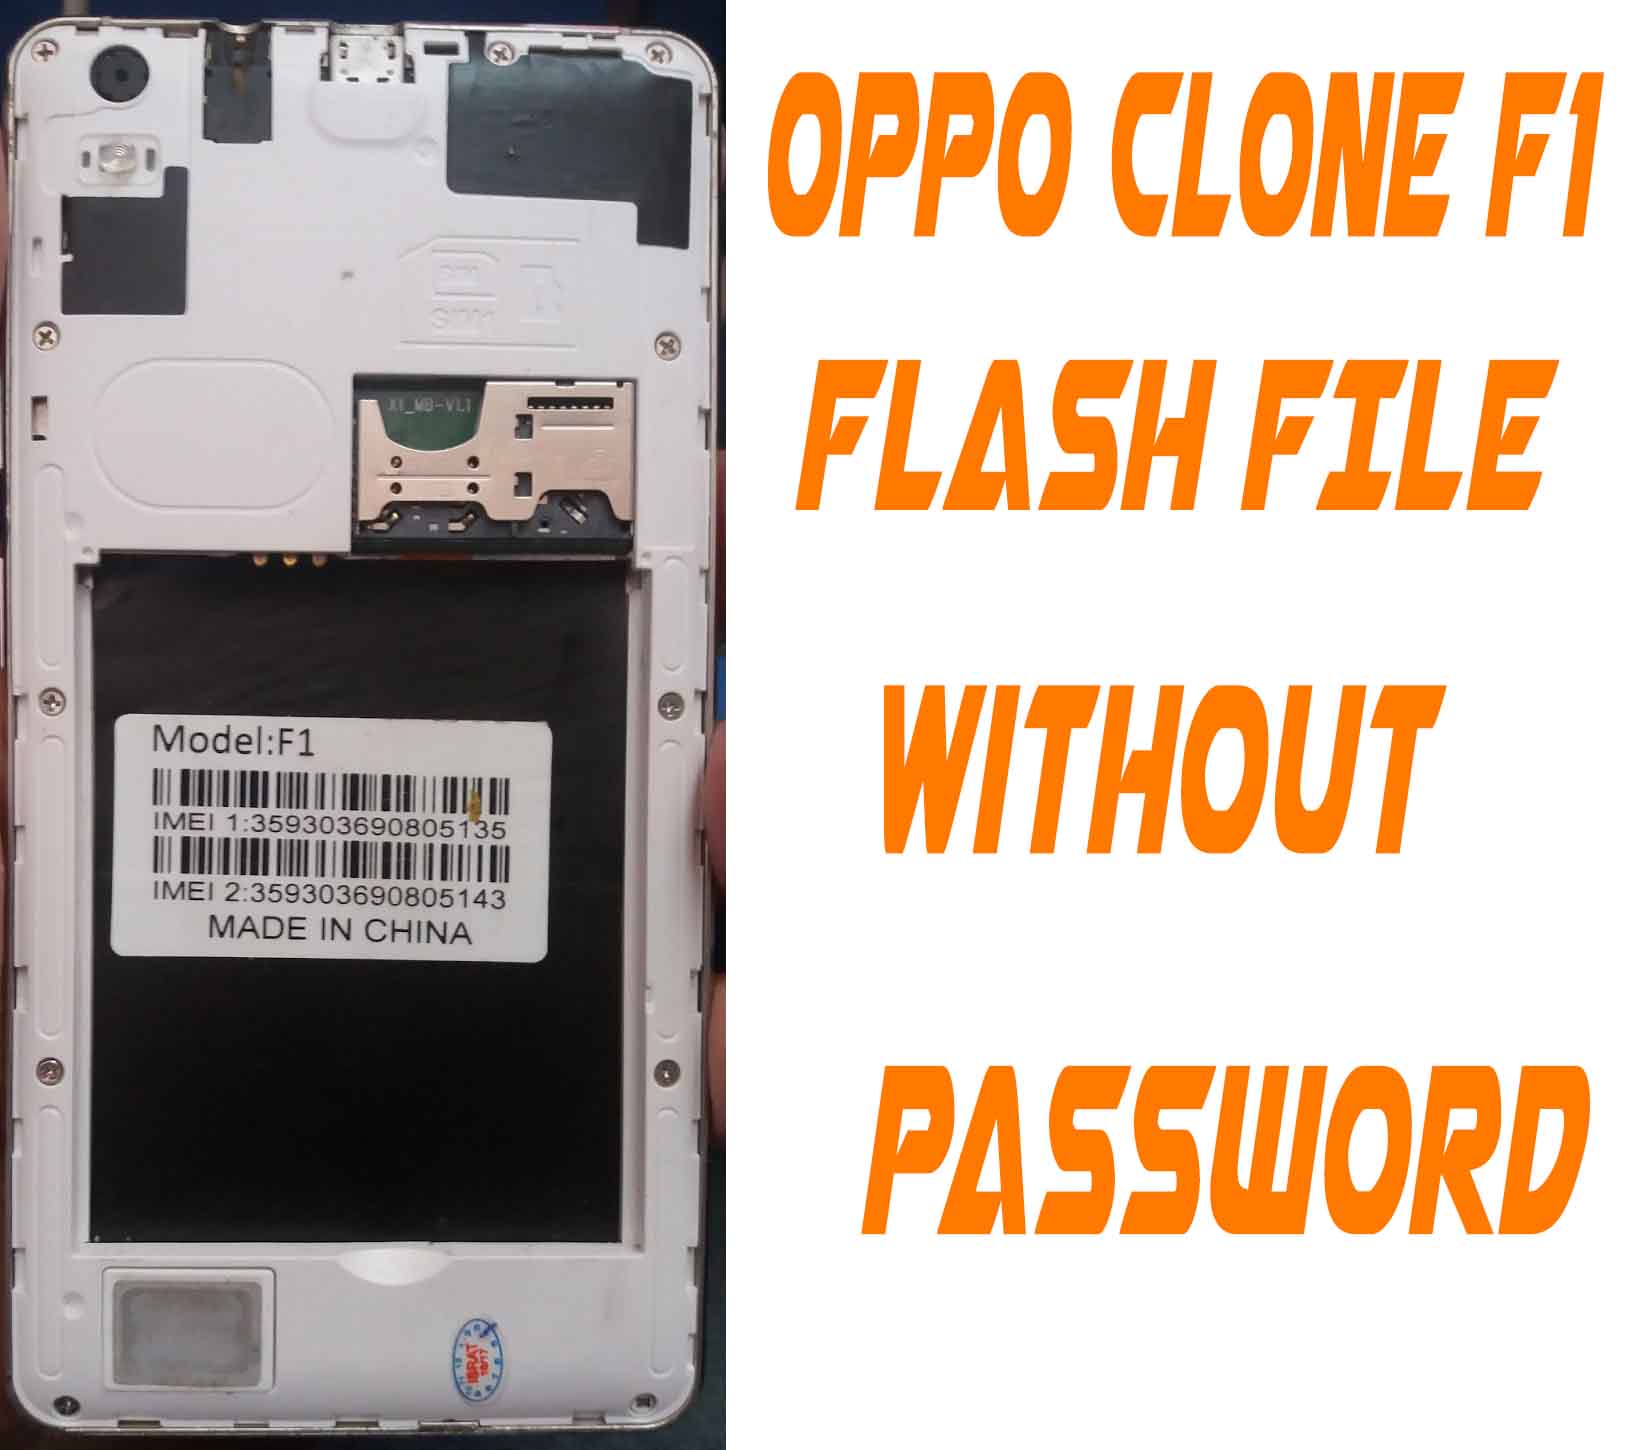 Oppo Clone F1 flash File Without Password